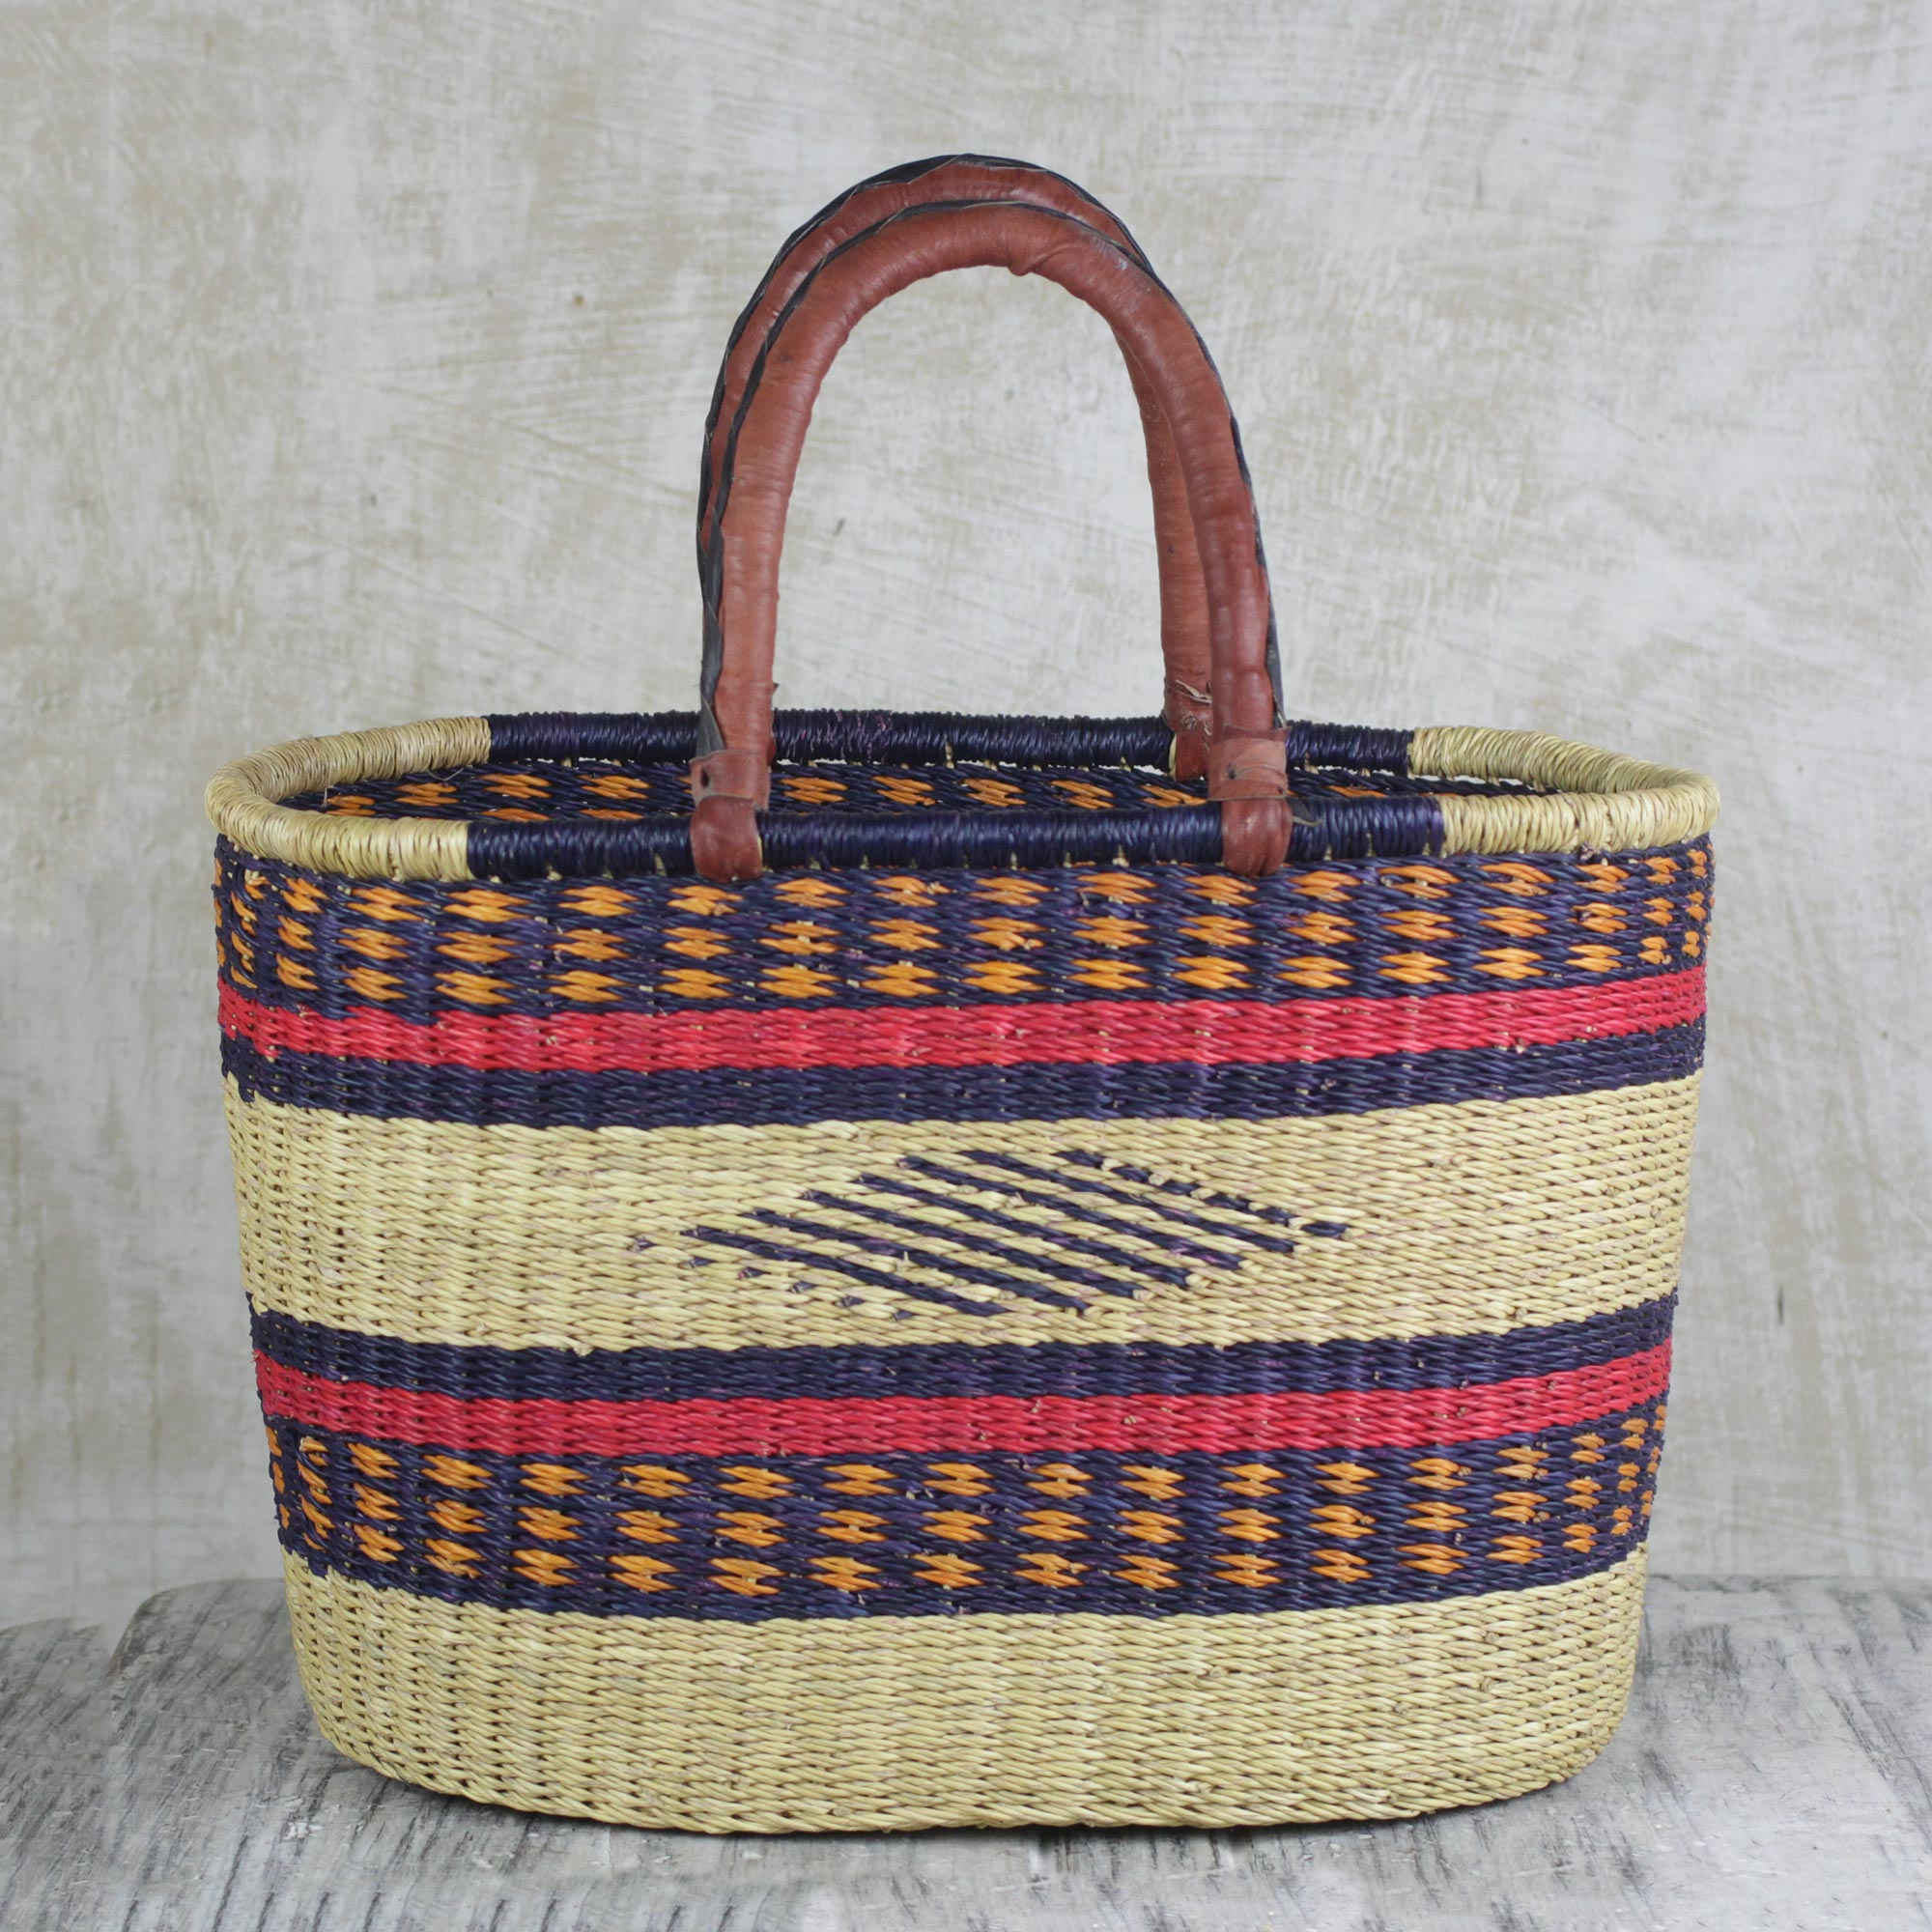 Hand Woven Raffia Natural Fiber Tote with Leather Strap - Kite Basket ...